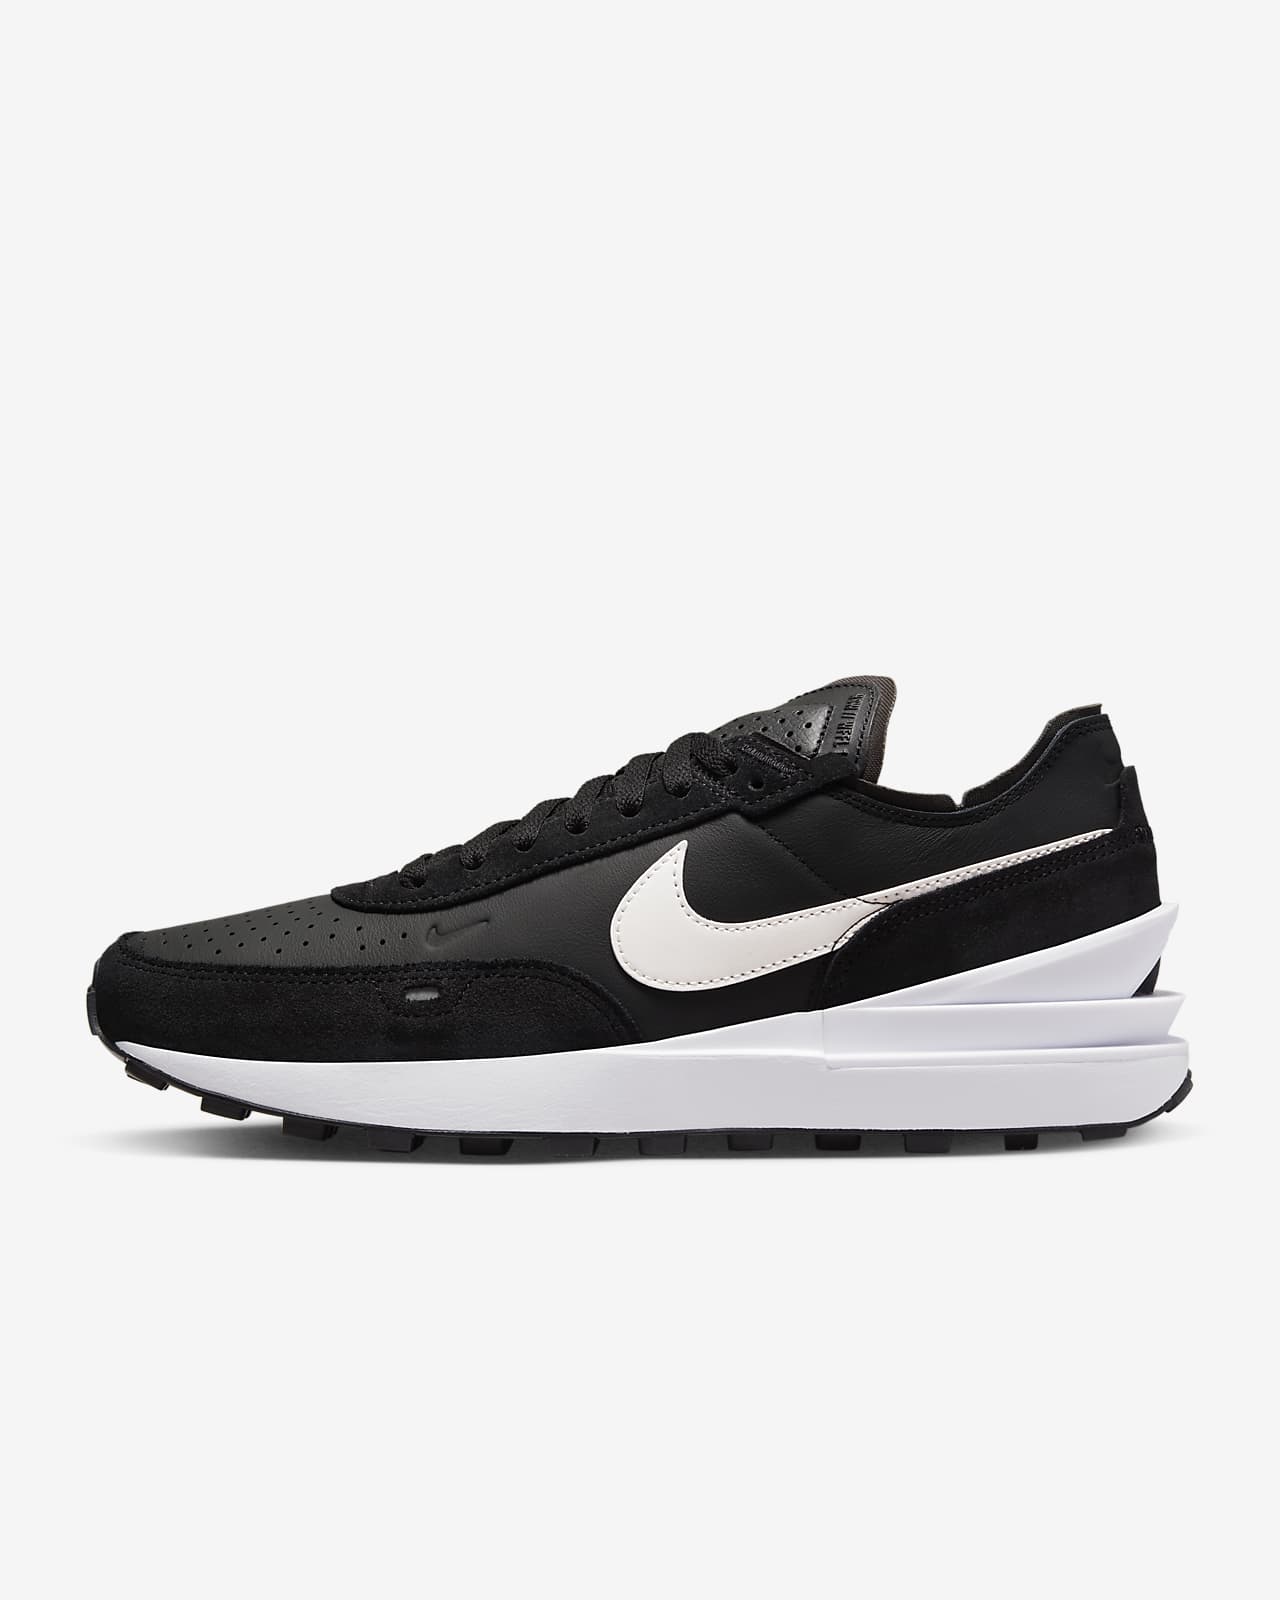 Chaussure Nike Waffle One Leather pour homme